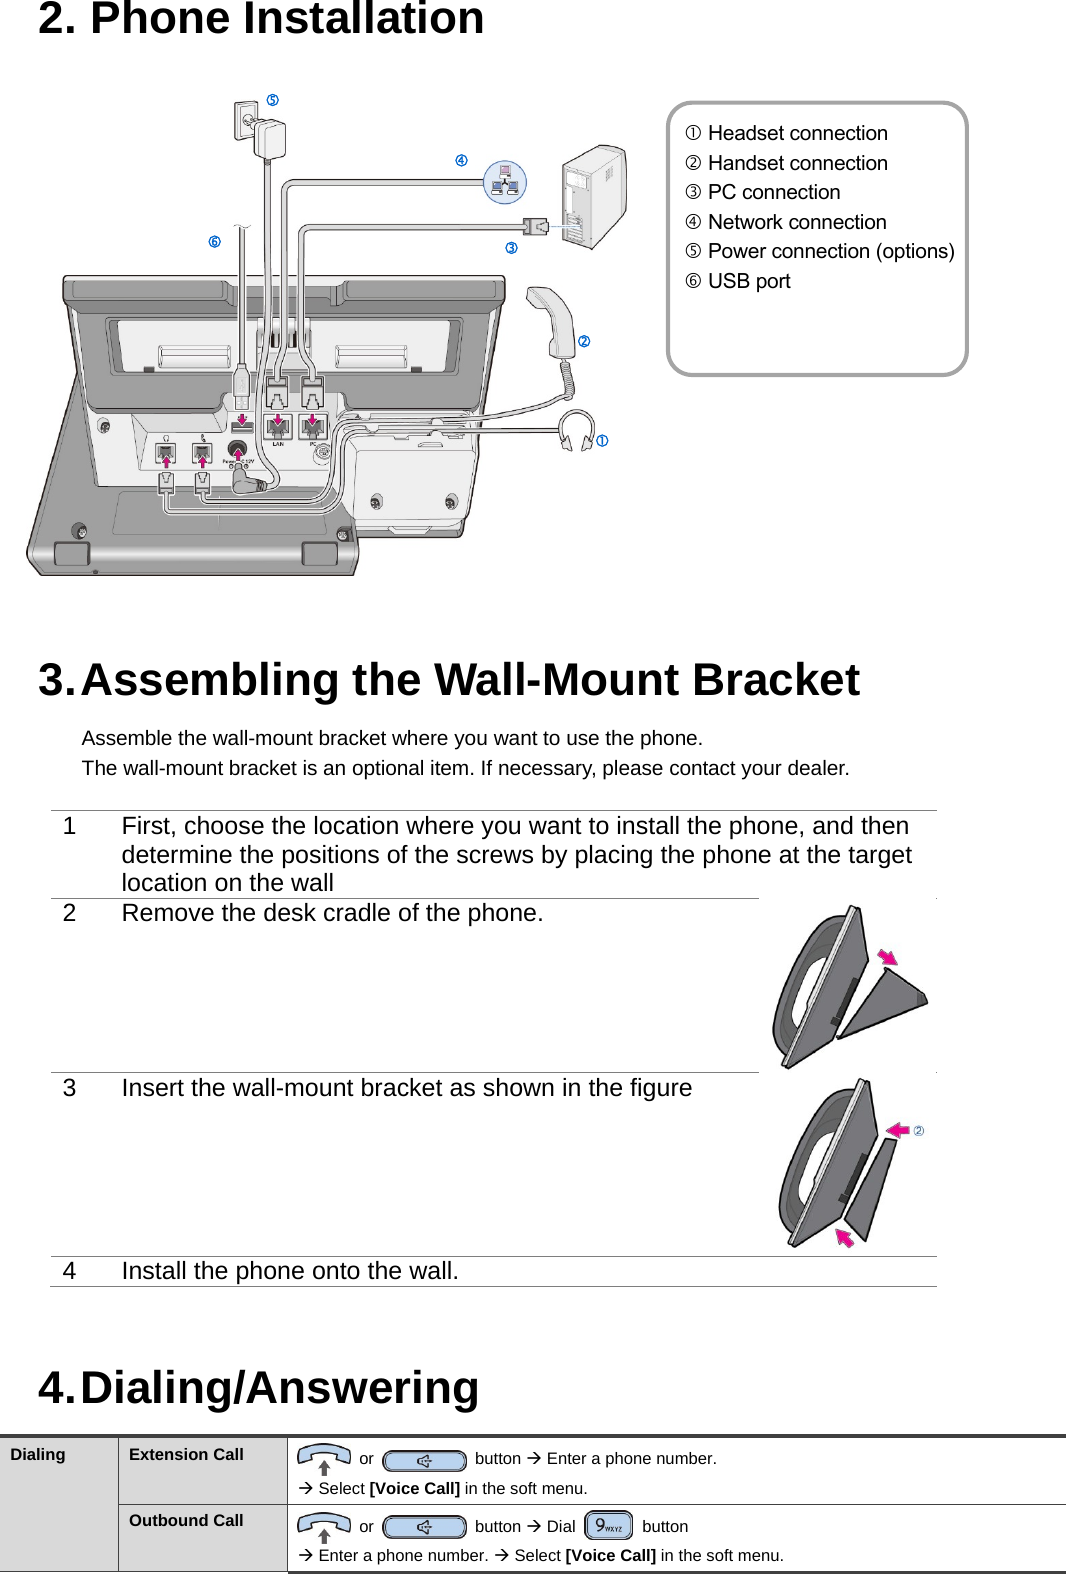 2.  Phone Installation         3. Assembling the Wall-Mount Bracket Assemble the wall-mount bracket where you want to use the phone. The wall-mount bracket is an optional item. If necessary, please contact your dealer.  1  First, choose the location where you want to install the phone, and then determine the positions of the screws by placing the phone at the target location on the wall 2  Remove the desk cradle of the phone.  3  Insert the wall-mount bracket as shown in the figure 4  Install the phone onto the wall.  4. Dialing/Answering Dialing  Extension Call   or   button  Enter a phone number.    Select [Voice Call] in the soft menu. Outbound Call   or   button  Dial   button   Enter a phone number.  Select [Voice Call] in the soft menu.  Headset connection  Handset connection  PC connection  Network connection  Power connection (options) USB port           